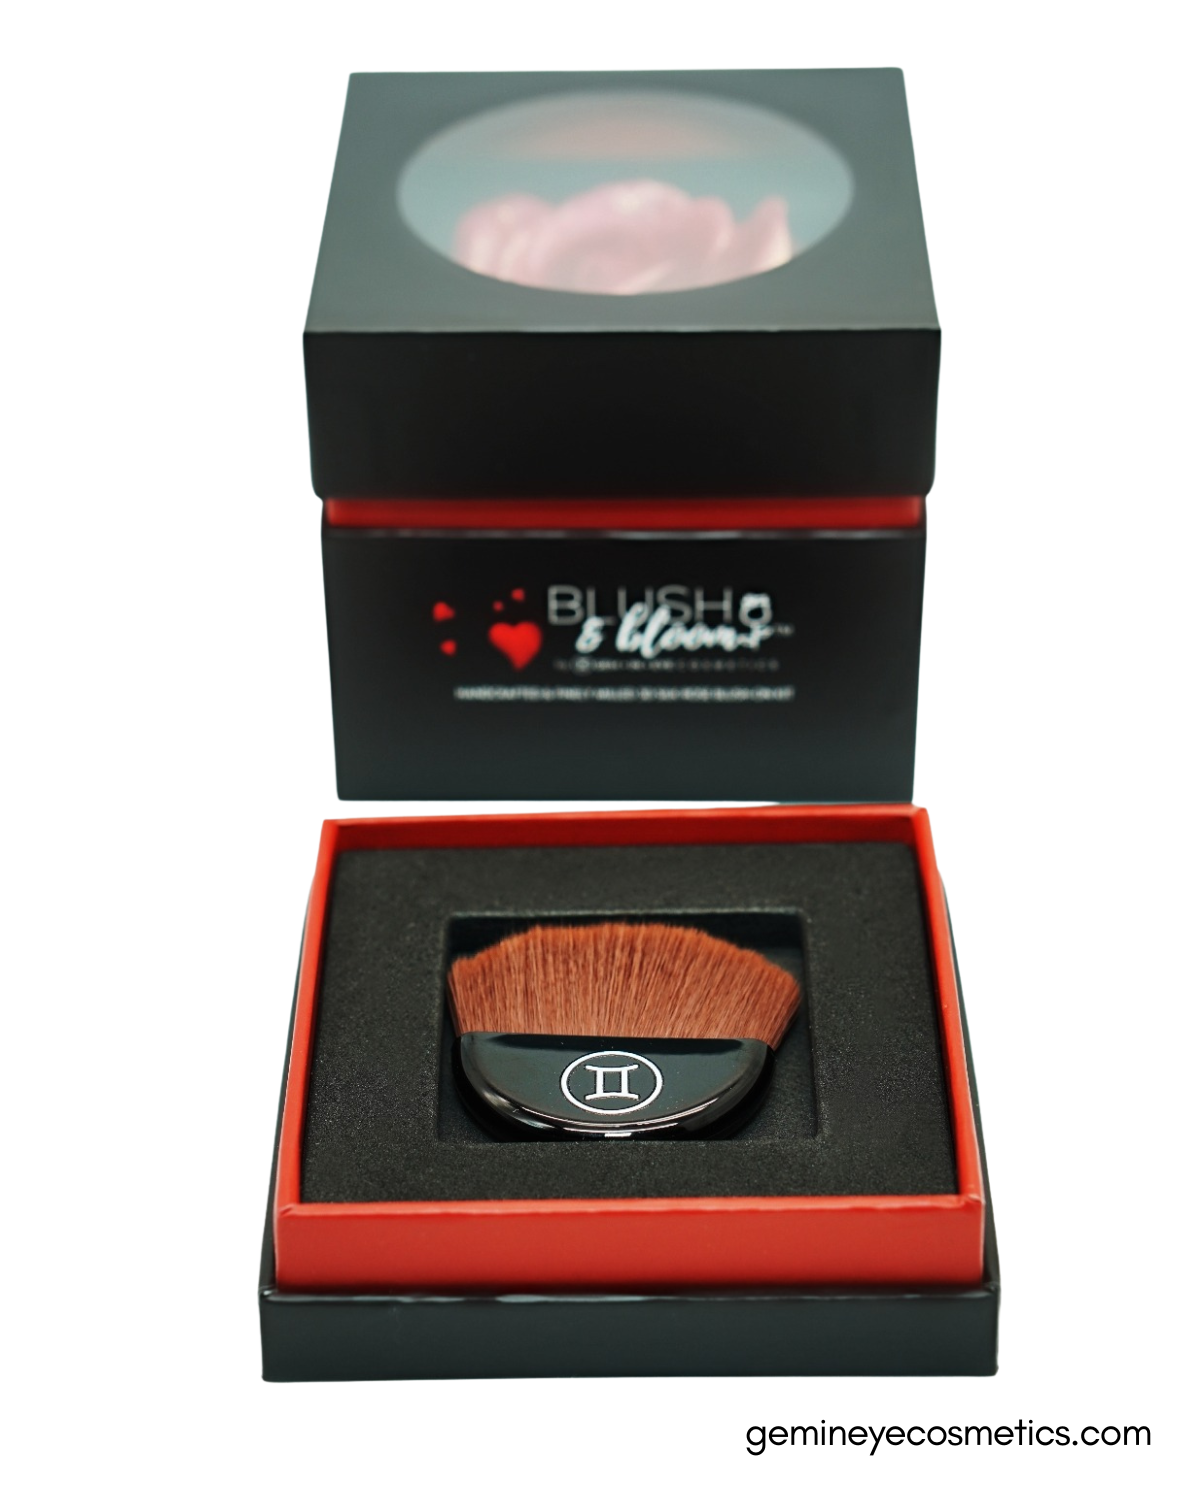 Blush&amp;Bloom™ is an Authentic Scented Rose Blush product designed by GEM IN EYE Cosmetics. This shade is Feisty in Rose Red color. It is highly pigmented and buildable great for all skin tones and best used for medium to dark skin tones. It is a creamy powder with a matte-to-shimmer finish. It will give you that “Blushing Bride Glow”. This blush kit comes with a flat blush brush! These rose blushes were first introduced in the beauty industry in NEW YORK FASHION WEEK September 2022 Edition